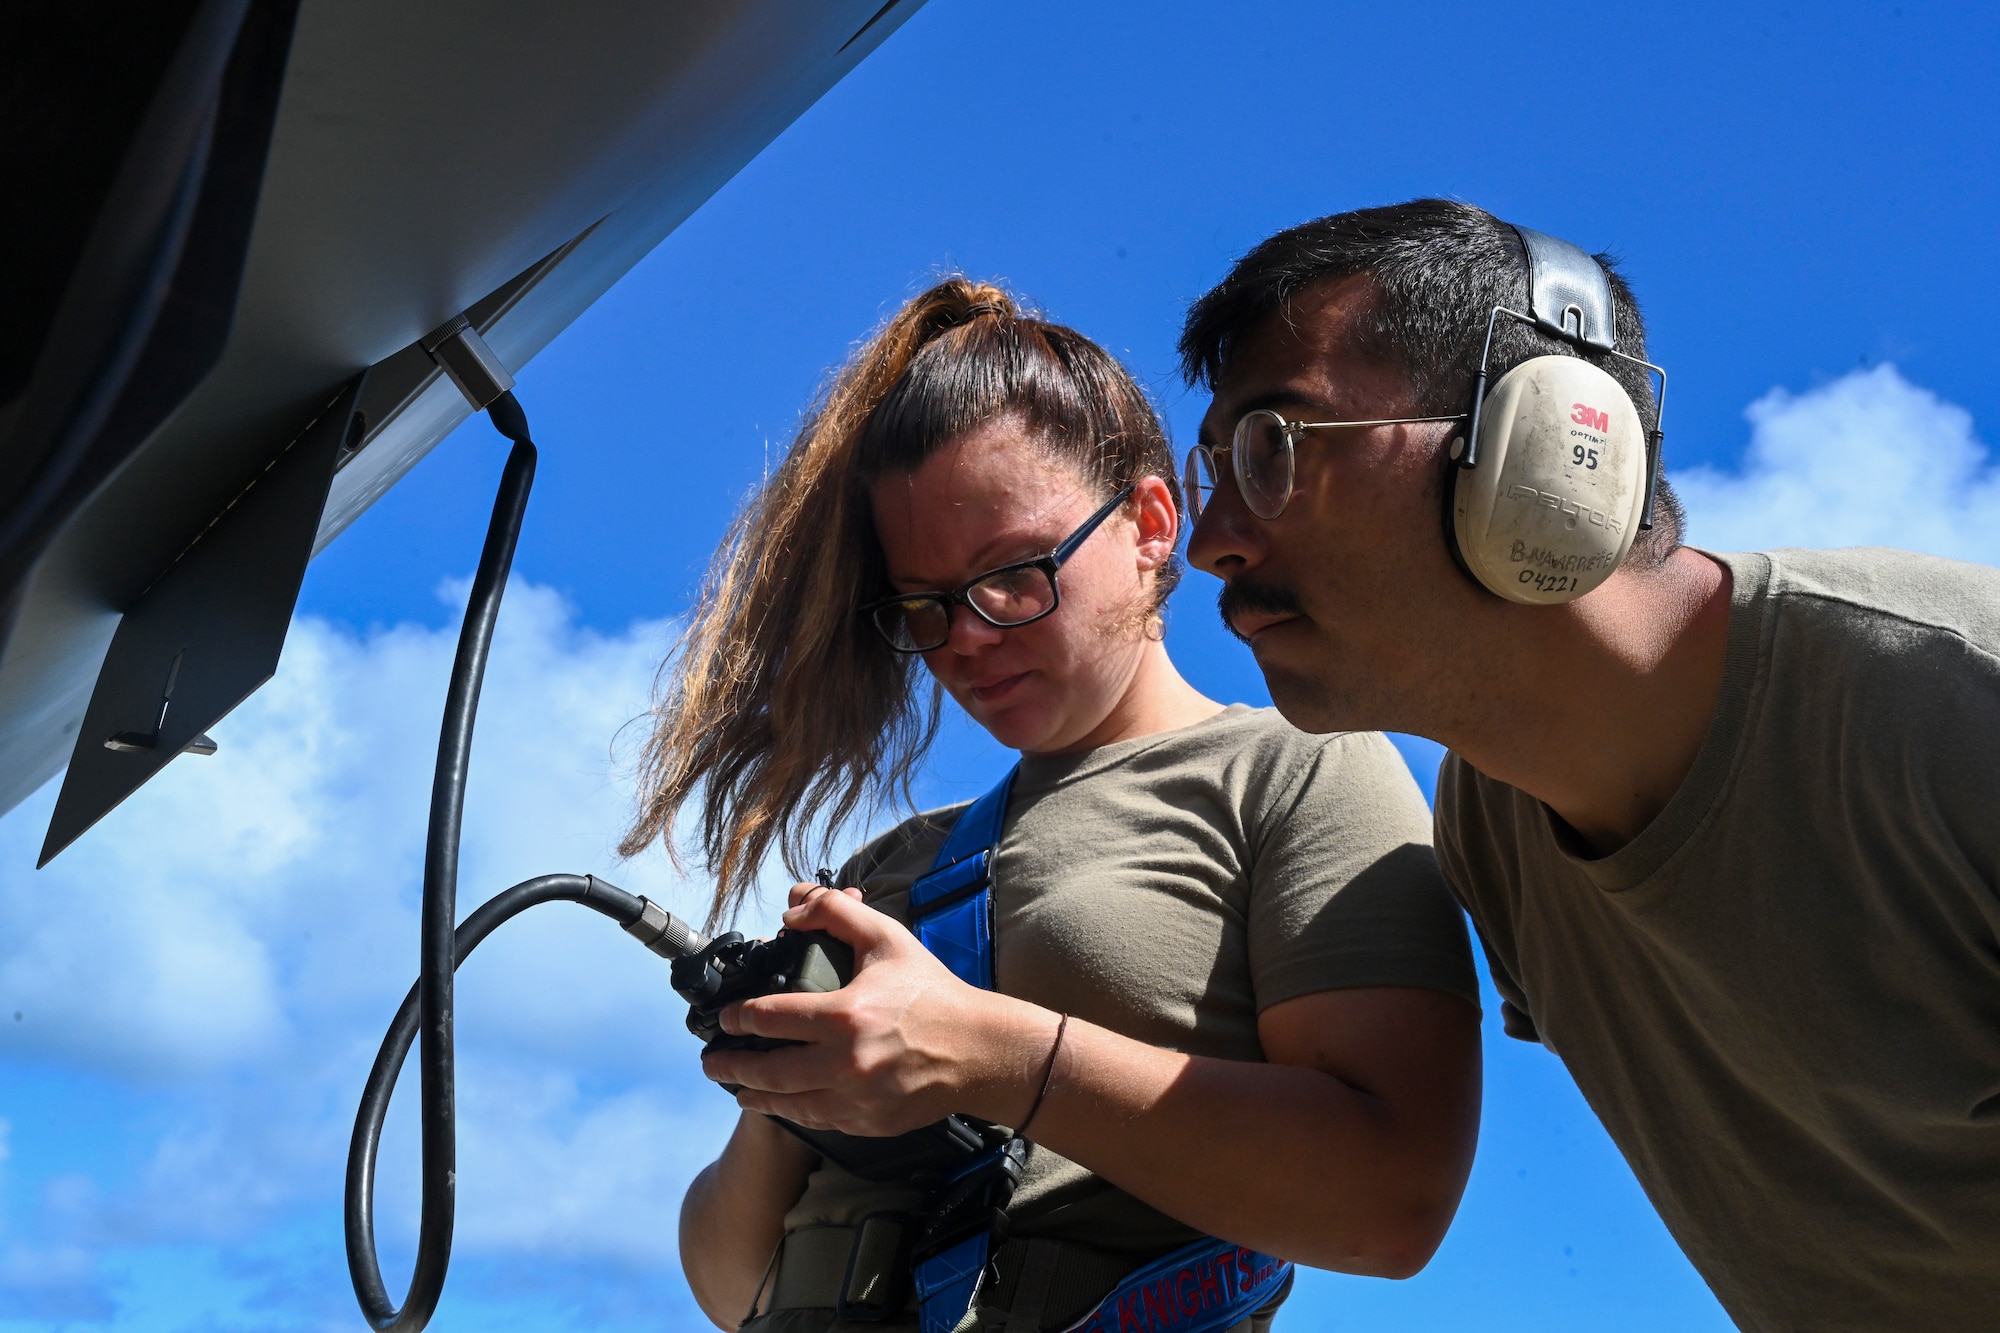 Staff Sgt. Aubree Kovalick, 49th Aircraft Maintenance Squadron avionics technician, and Airman 1st Class Brandon Navarrete, 49th AMXS special avionics technician, load GPS keys to an MQ-9 Reaper Sept. 15, 2021, on Marine Corps Base Hawaii. The purpose of Exercise Agile Combat Employment Reaper is to demonstrate the MQ-9 assets and the ability to rapidly mobilize and integrate across multiple domains. (U.S. Air Force photo by Airman 1st Class Adrian Salazar)